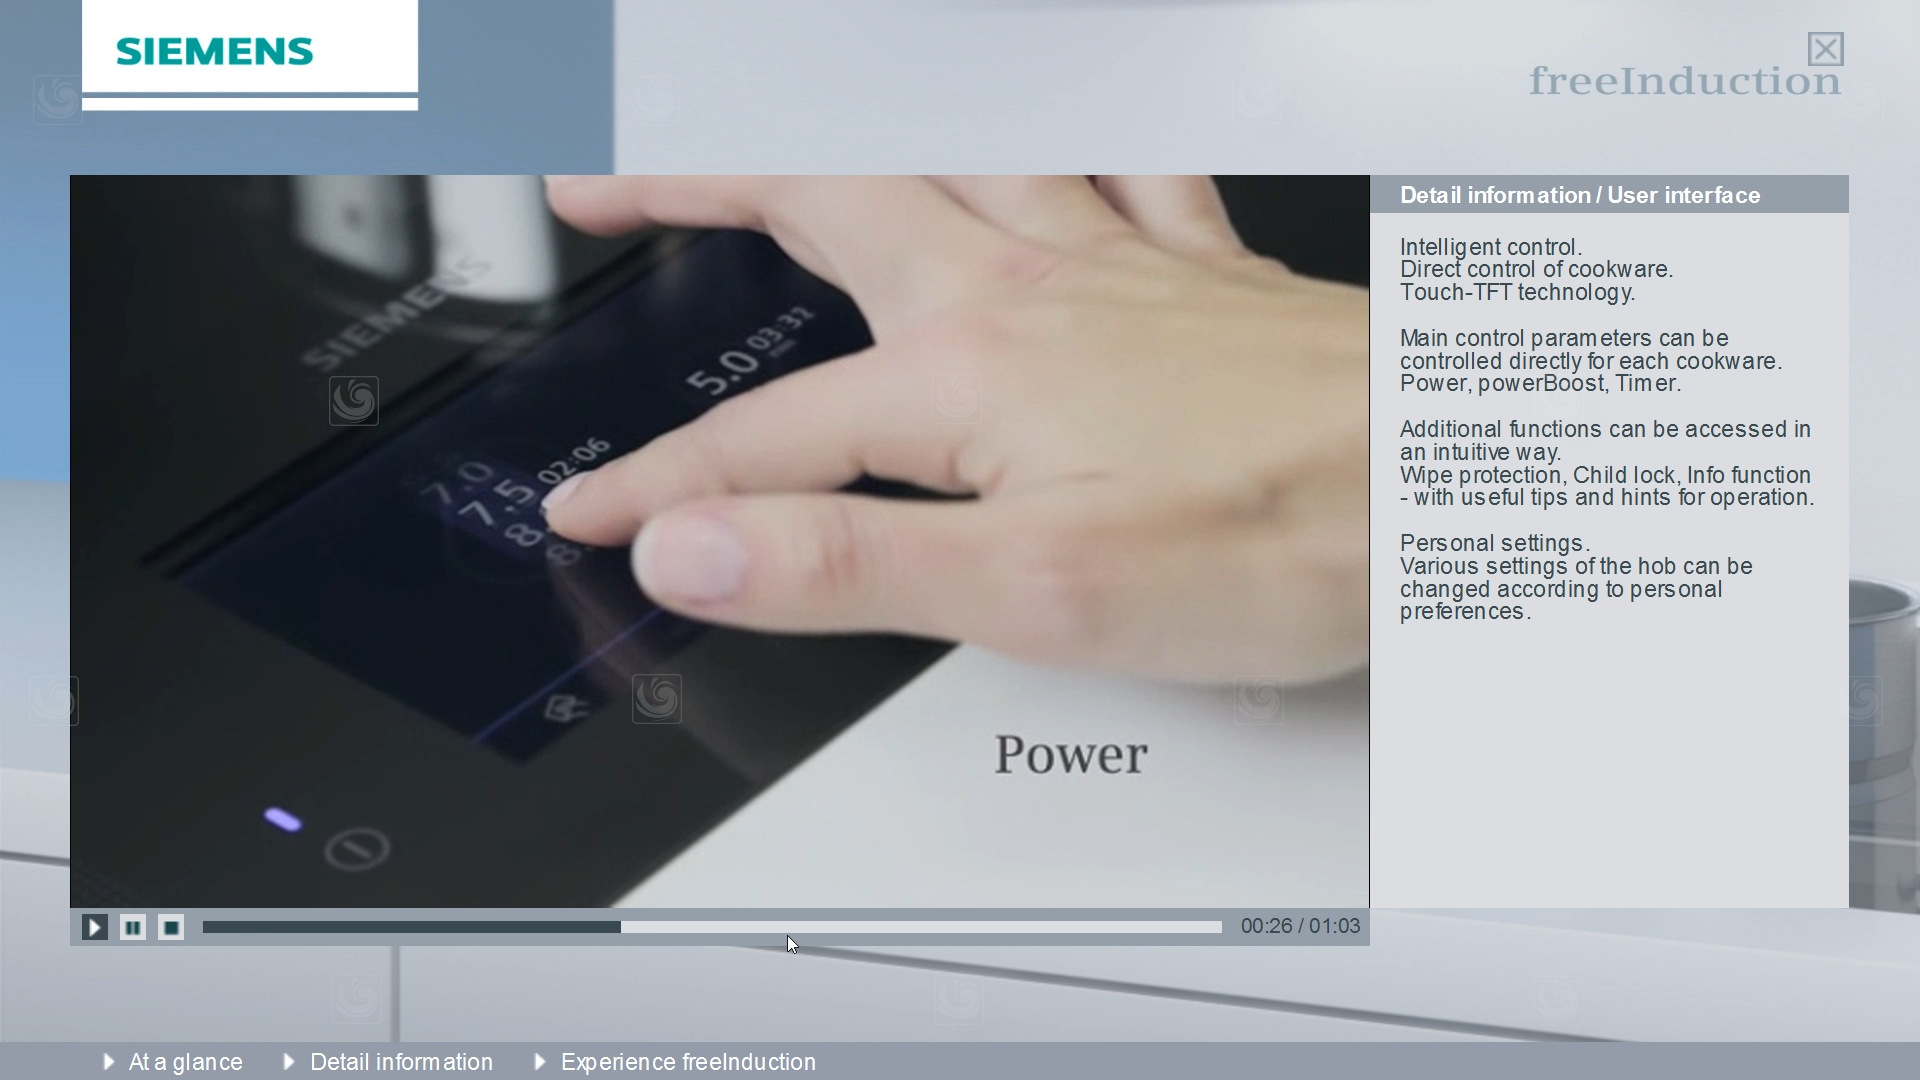 nduction cooktop explanatory video playback functionality, in a web app developed for Bosch and Siemens